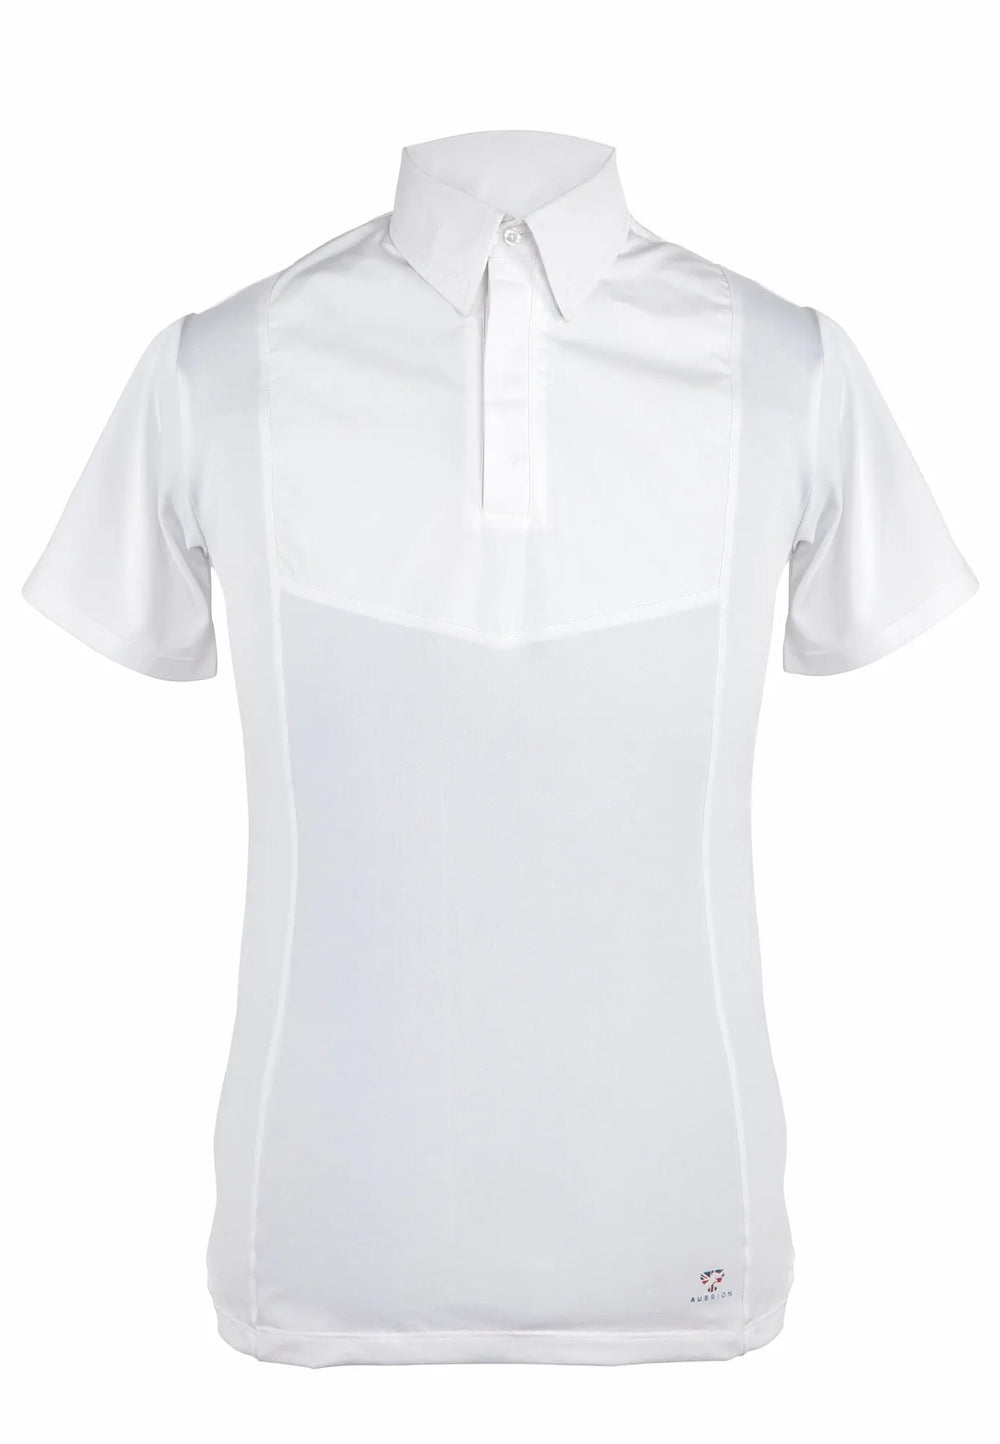 The Aubrion Mens Short Sleeve Tie Shirt in White#White